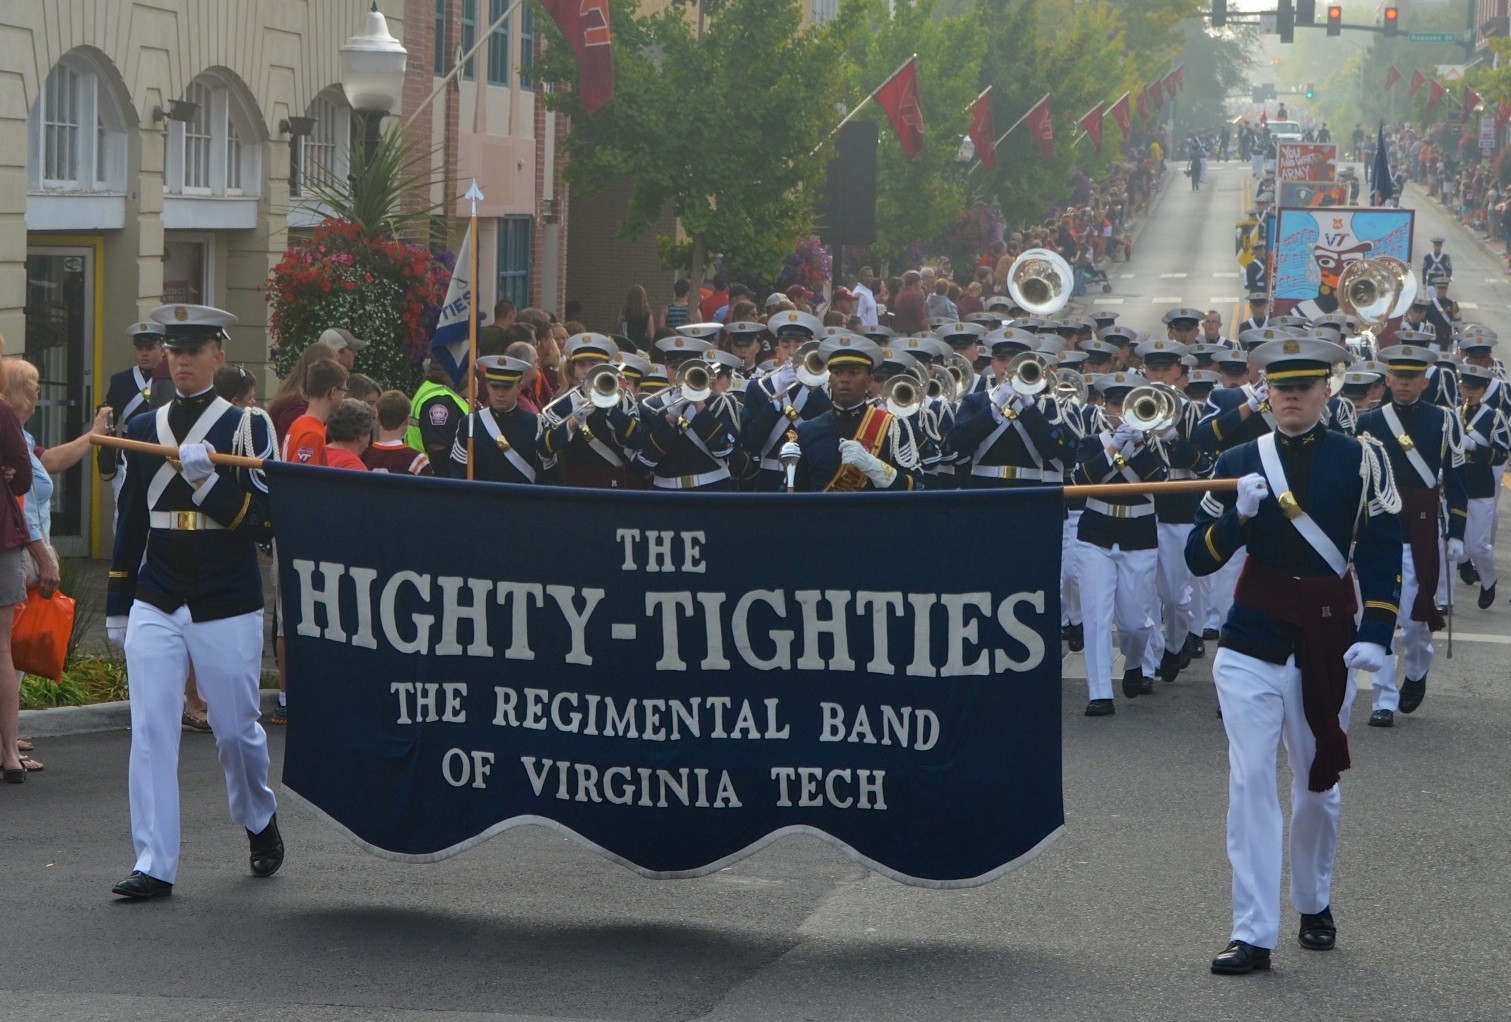 The Highty-Tighties march in a parade in downtown Blacksburg